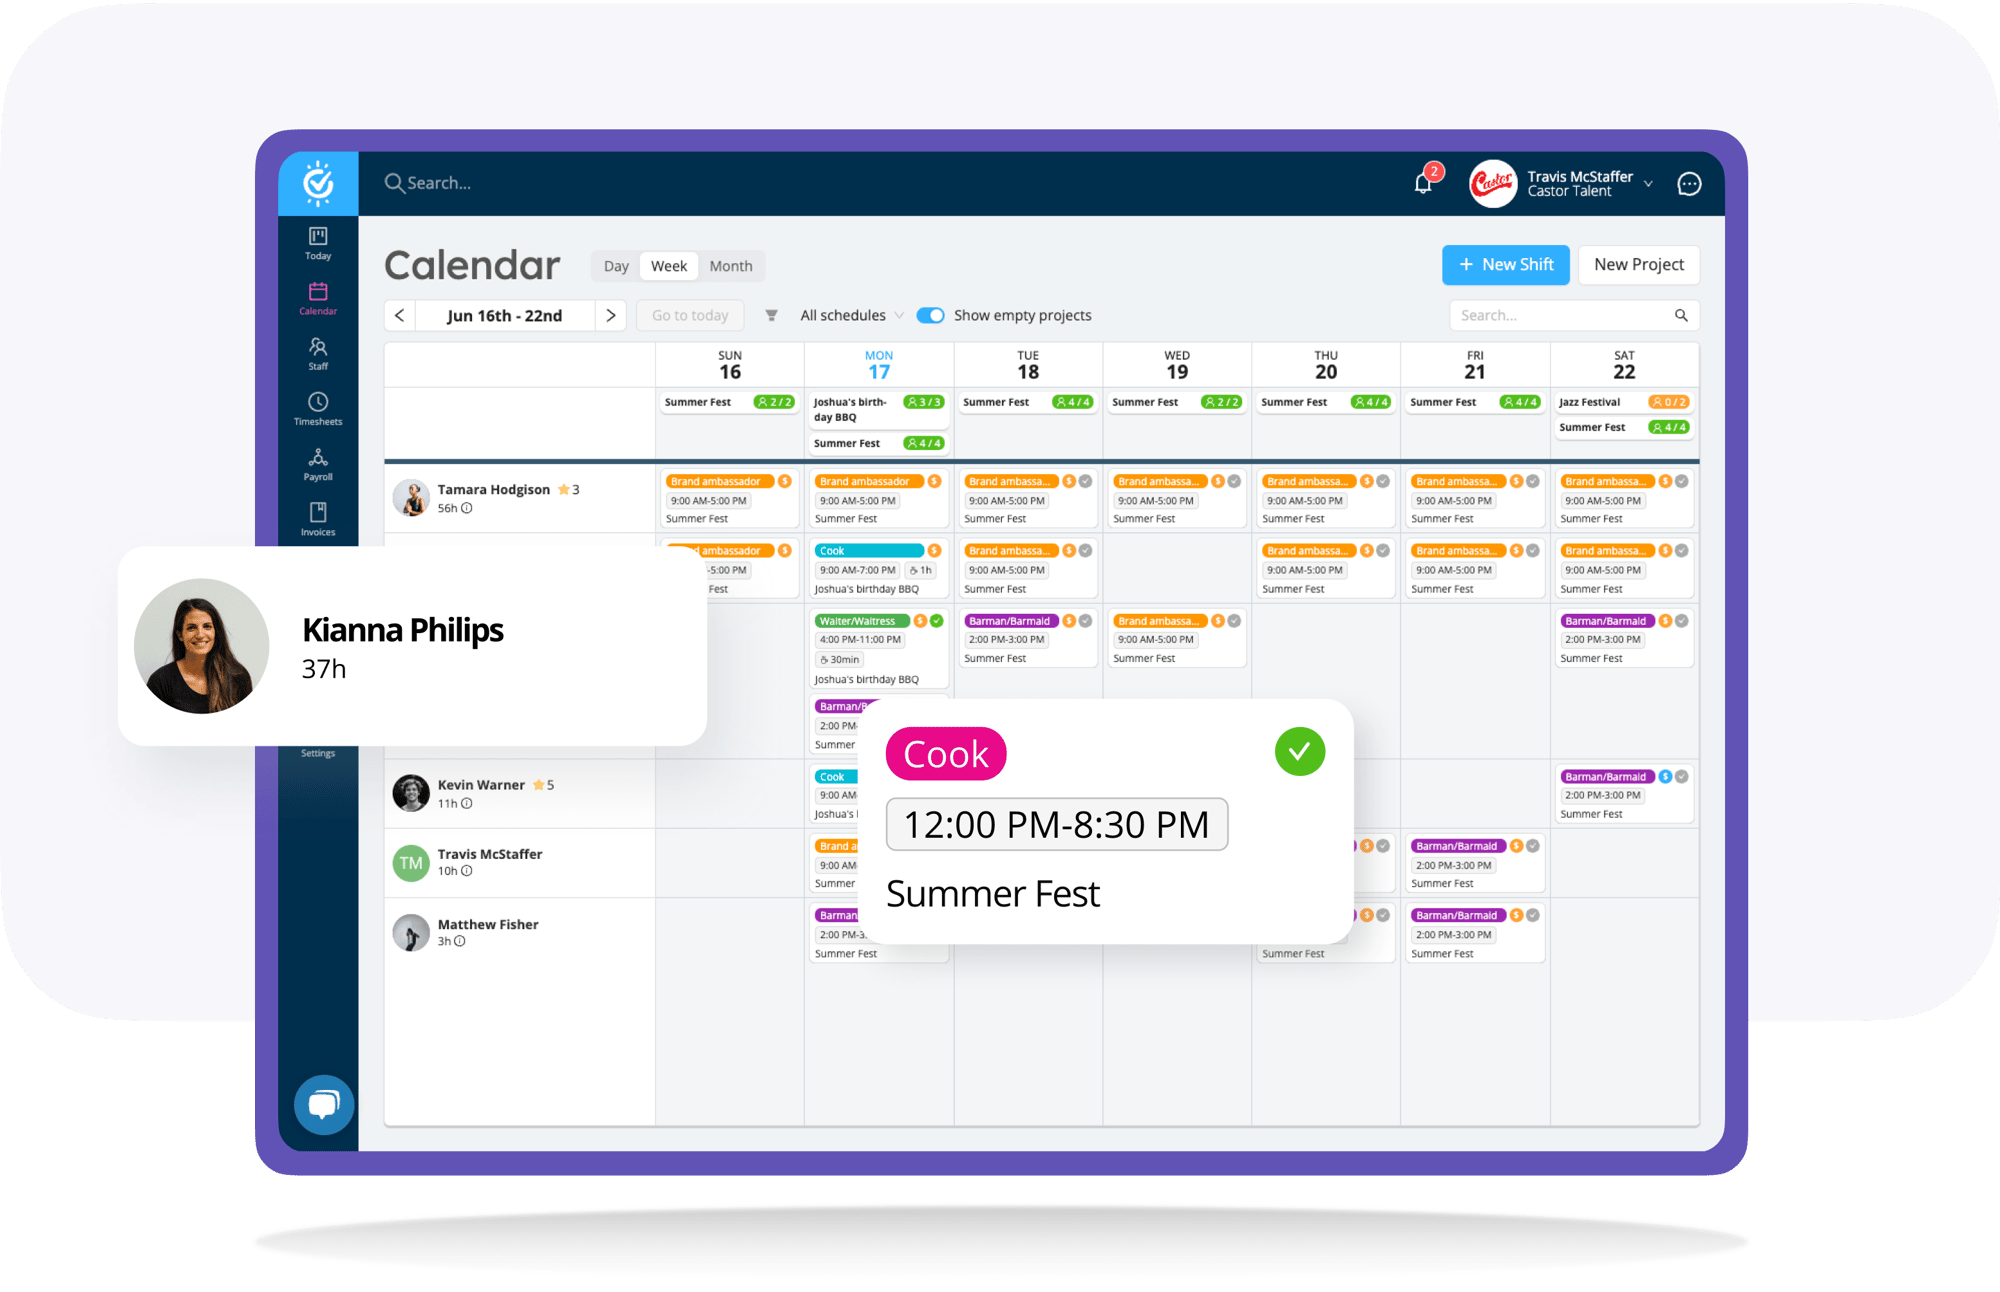 Calendar Views With All Your Schedules at a Glance